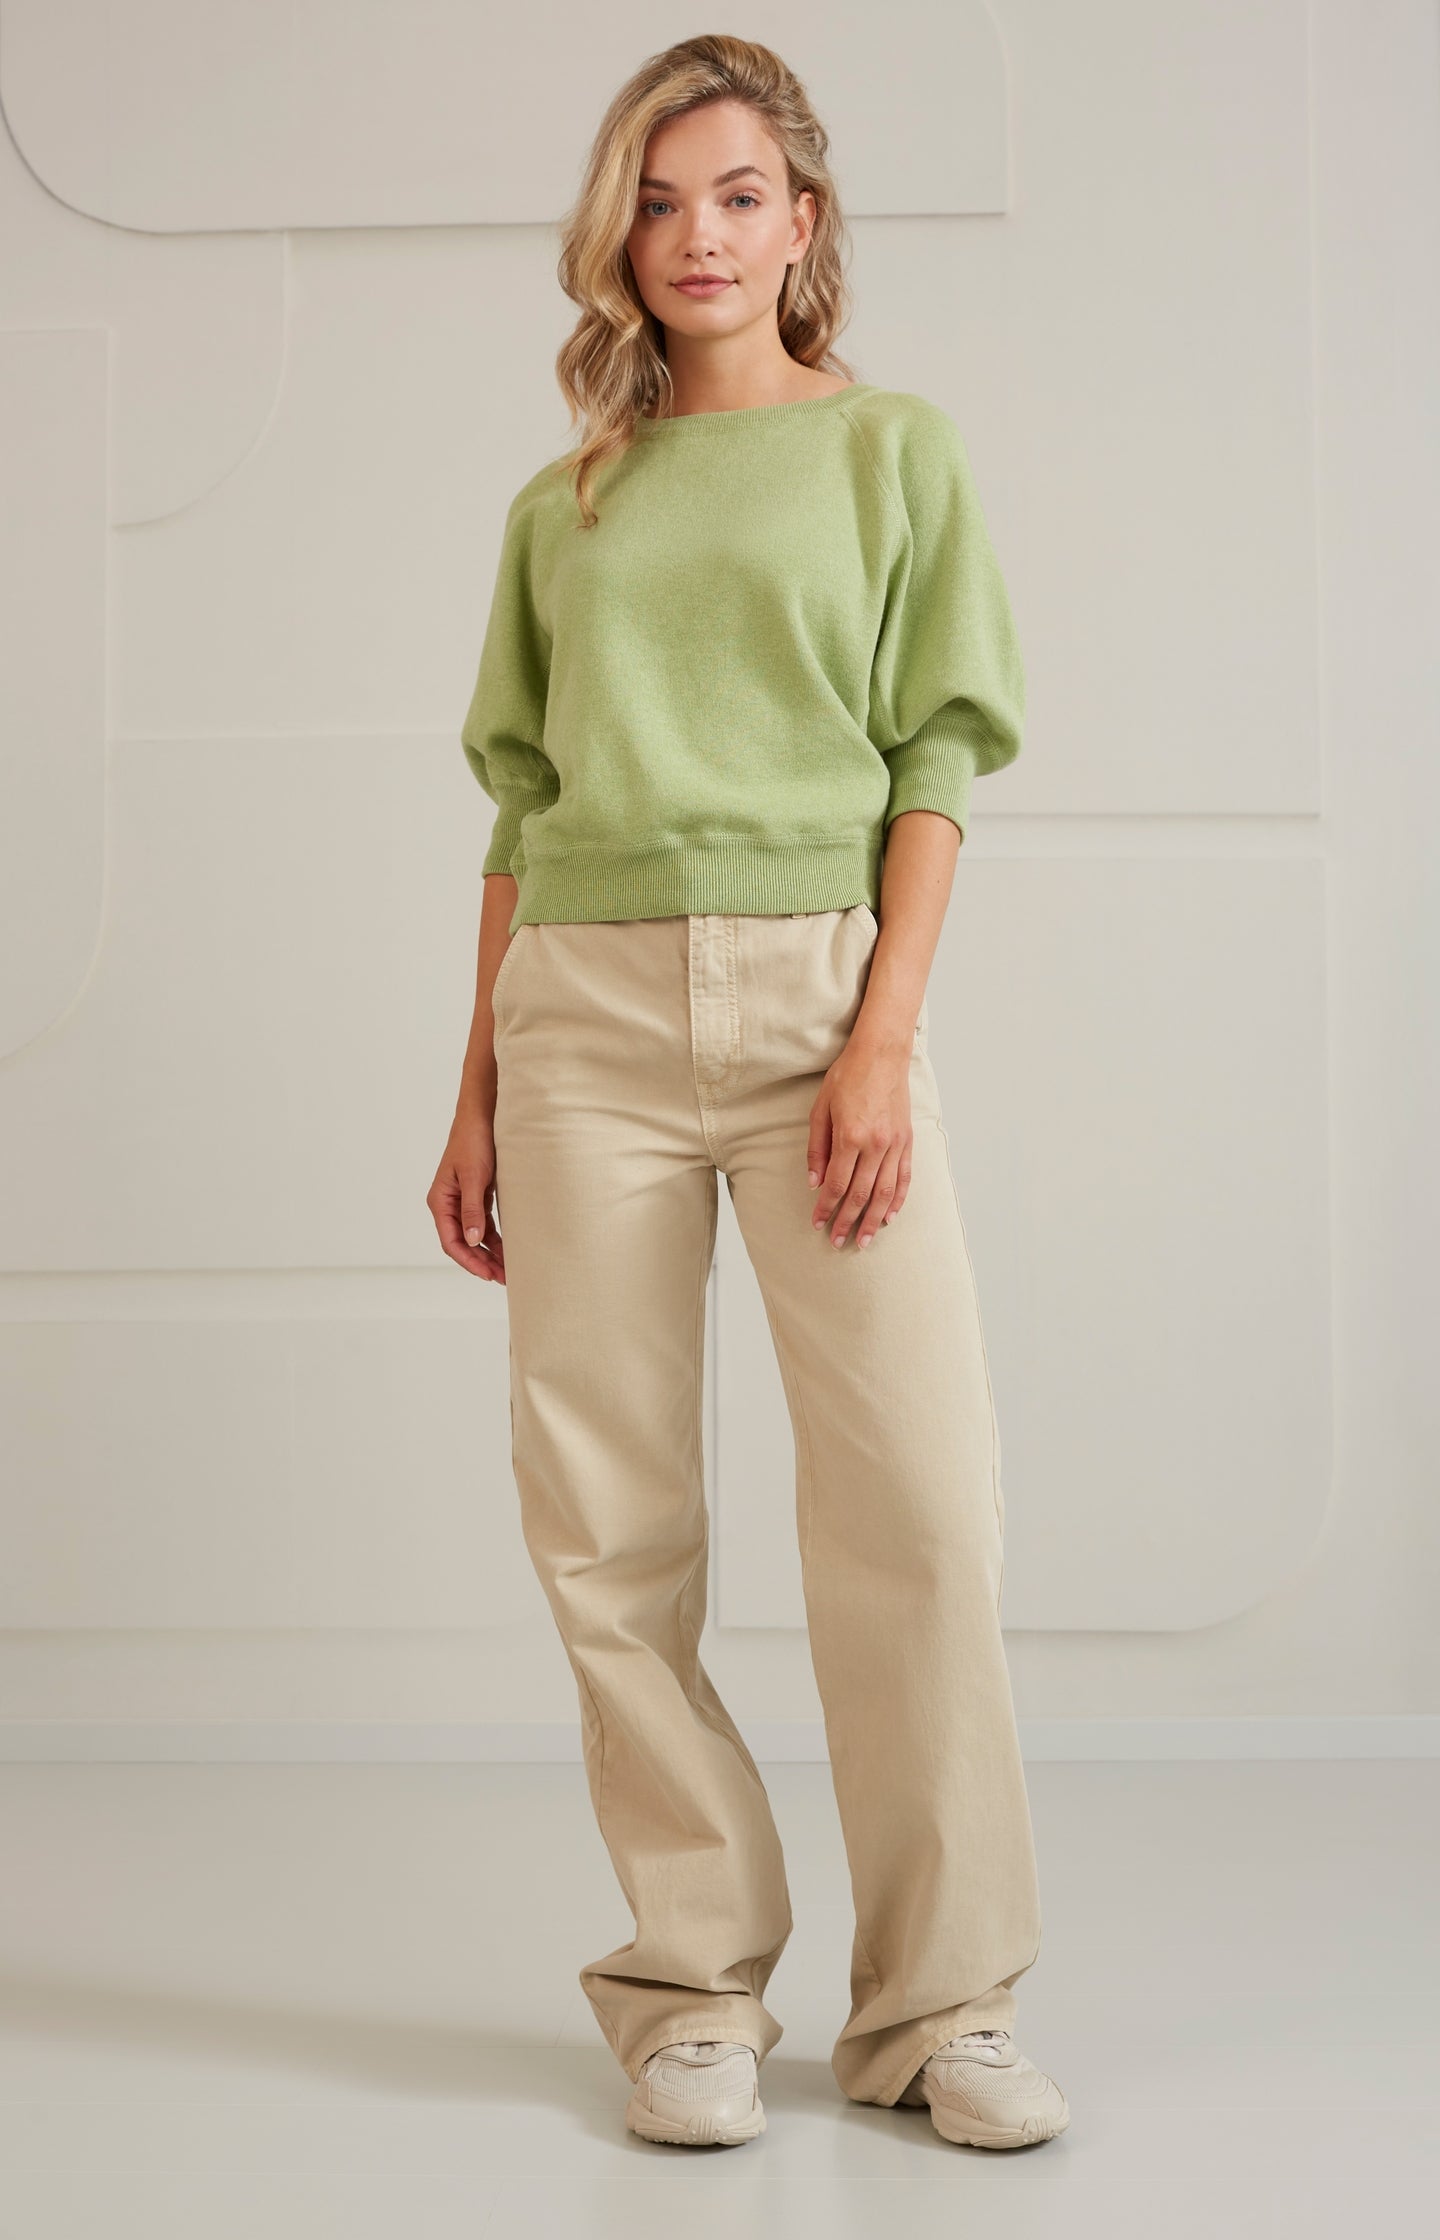 Sweater with round neck and half long raglan sleeves - Tendrill Green Melange - Type: lookbook